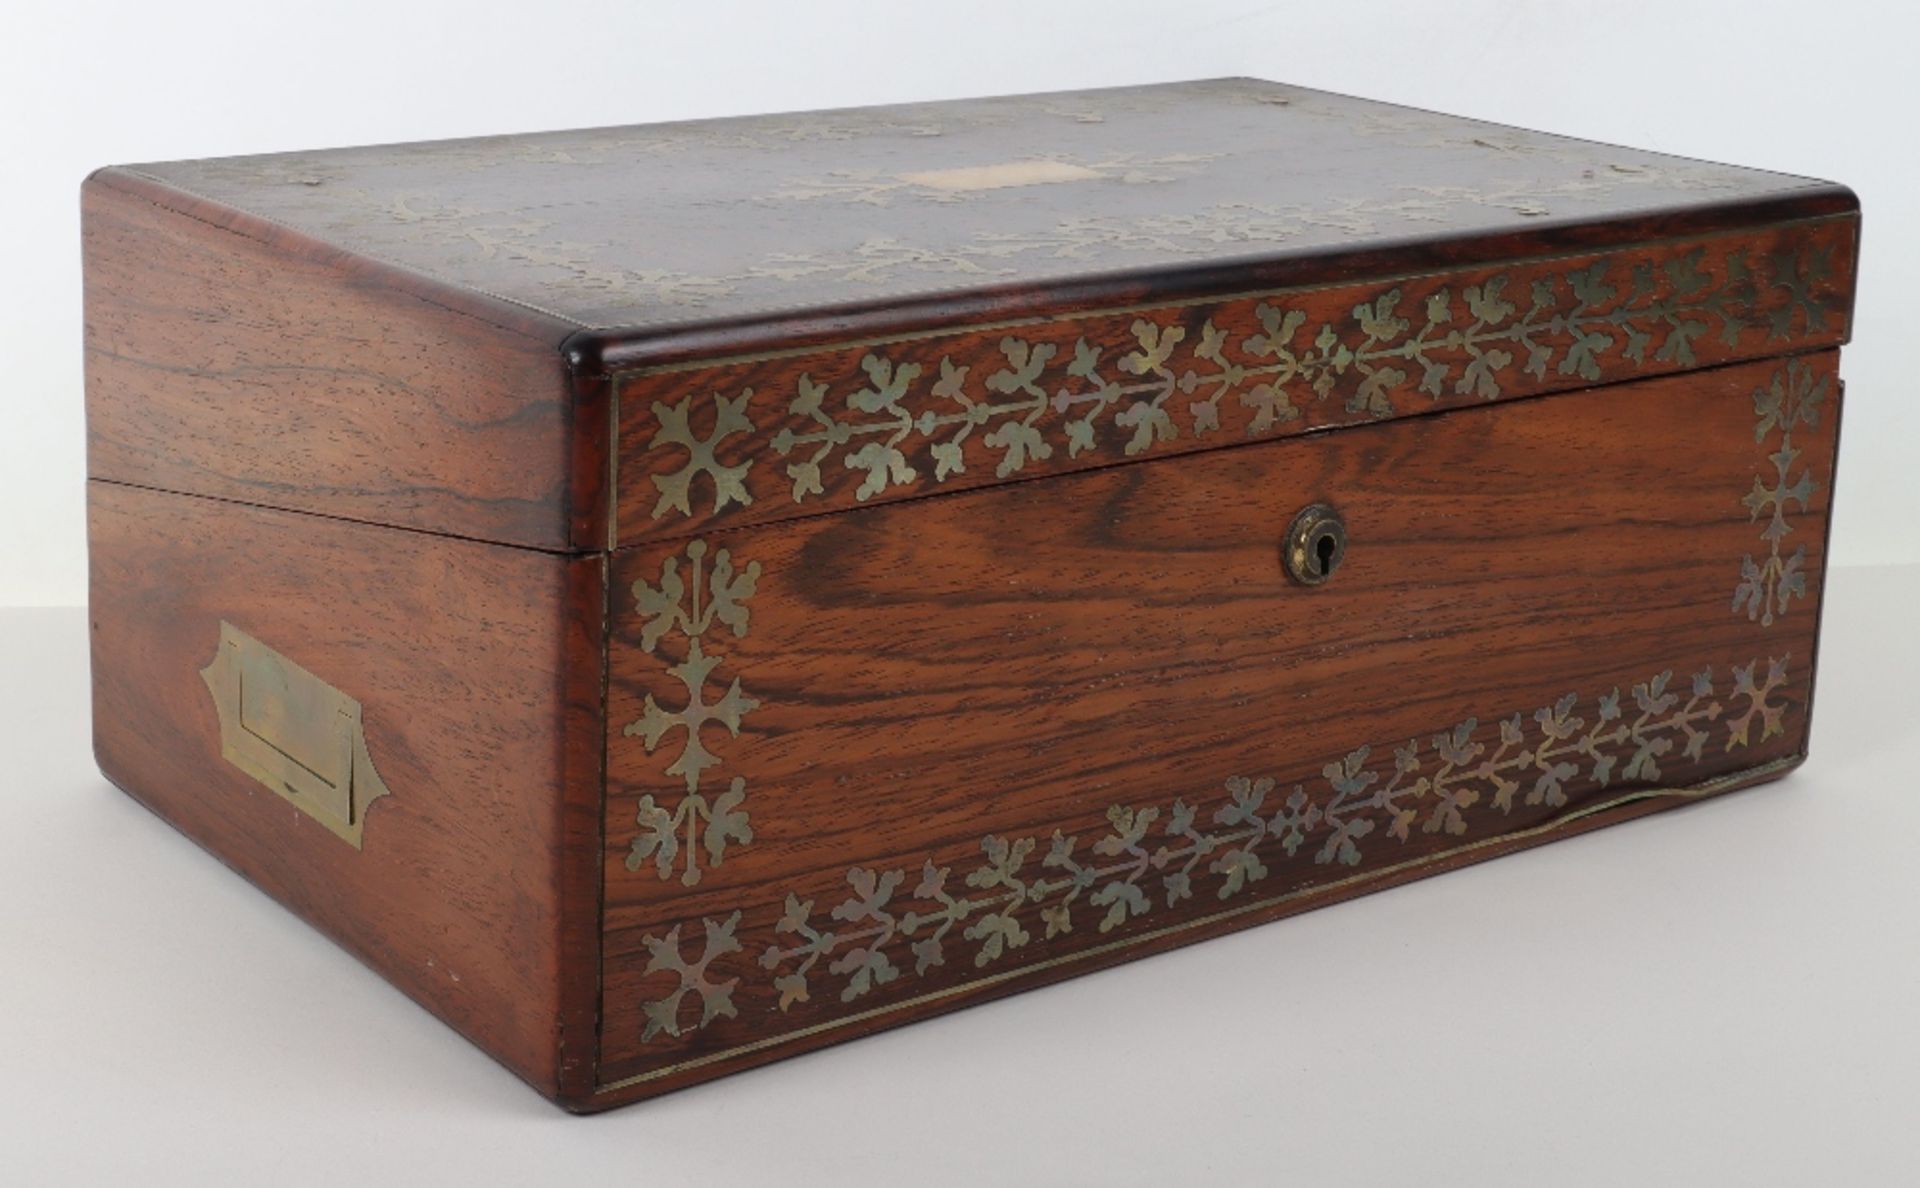 A late 18th century rosewood and brass inlay writing slop, in the manner of George Bullock - Image 3 of 7